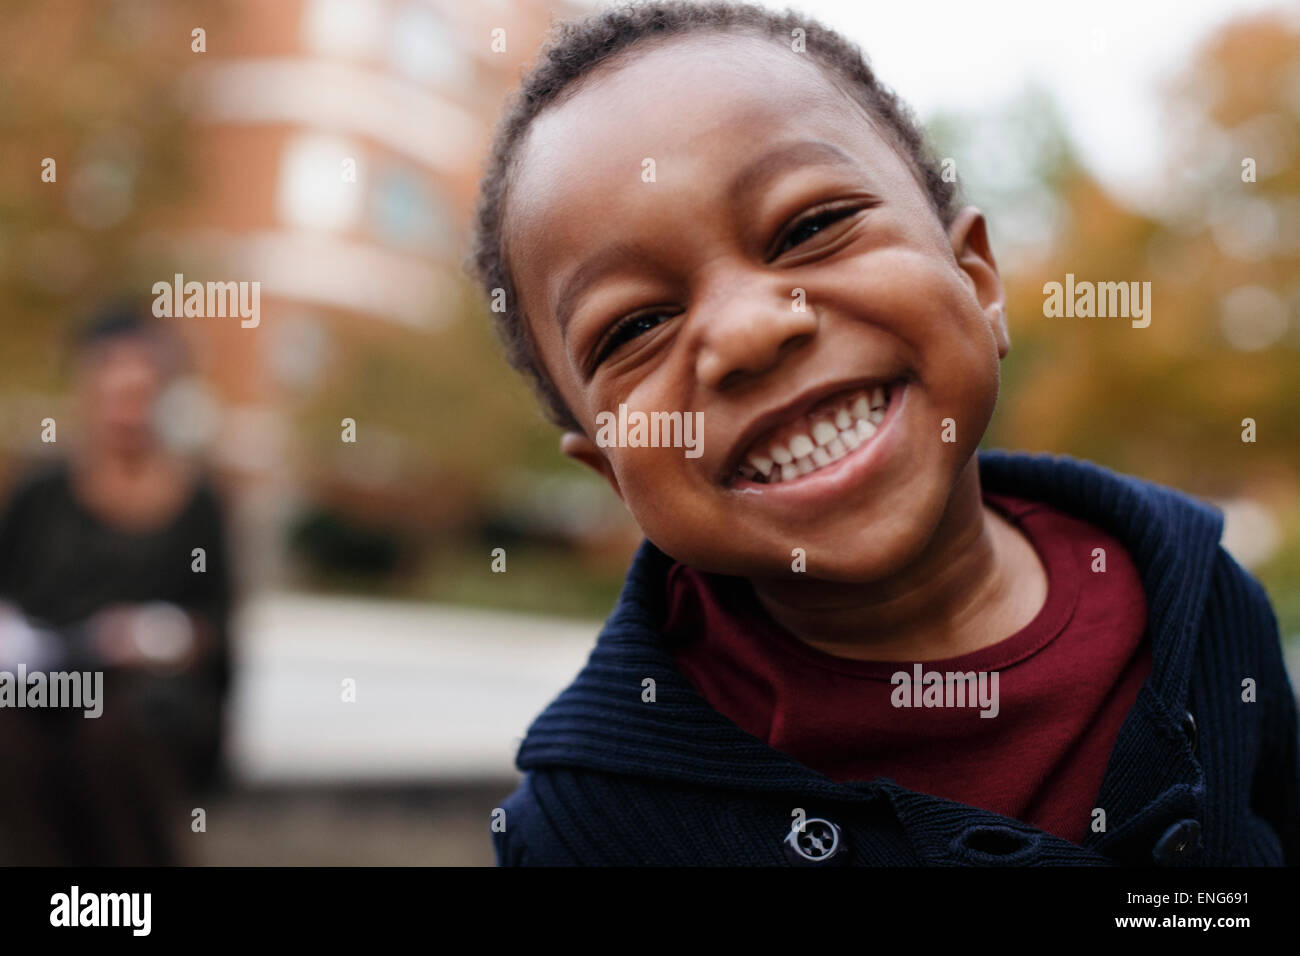 Close up of smiling face of African American boy Stock Photo